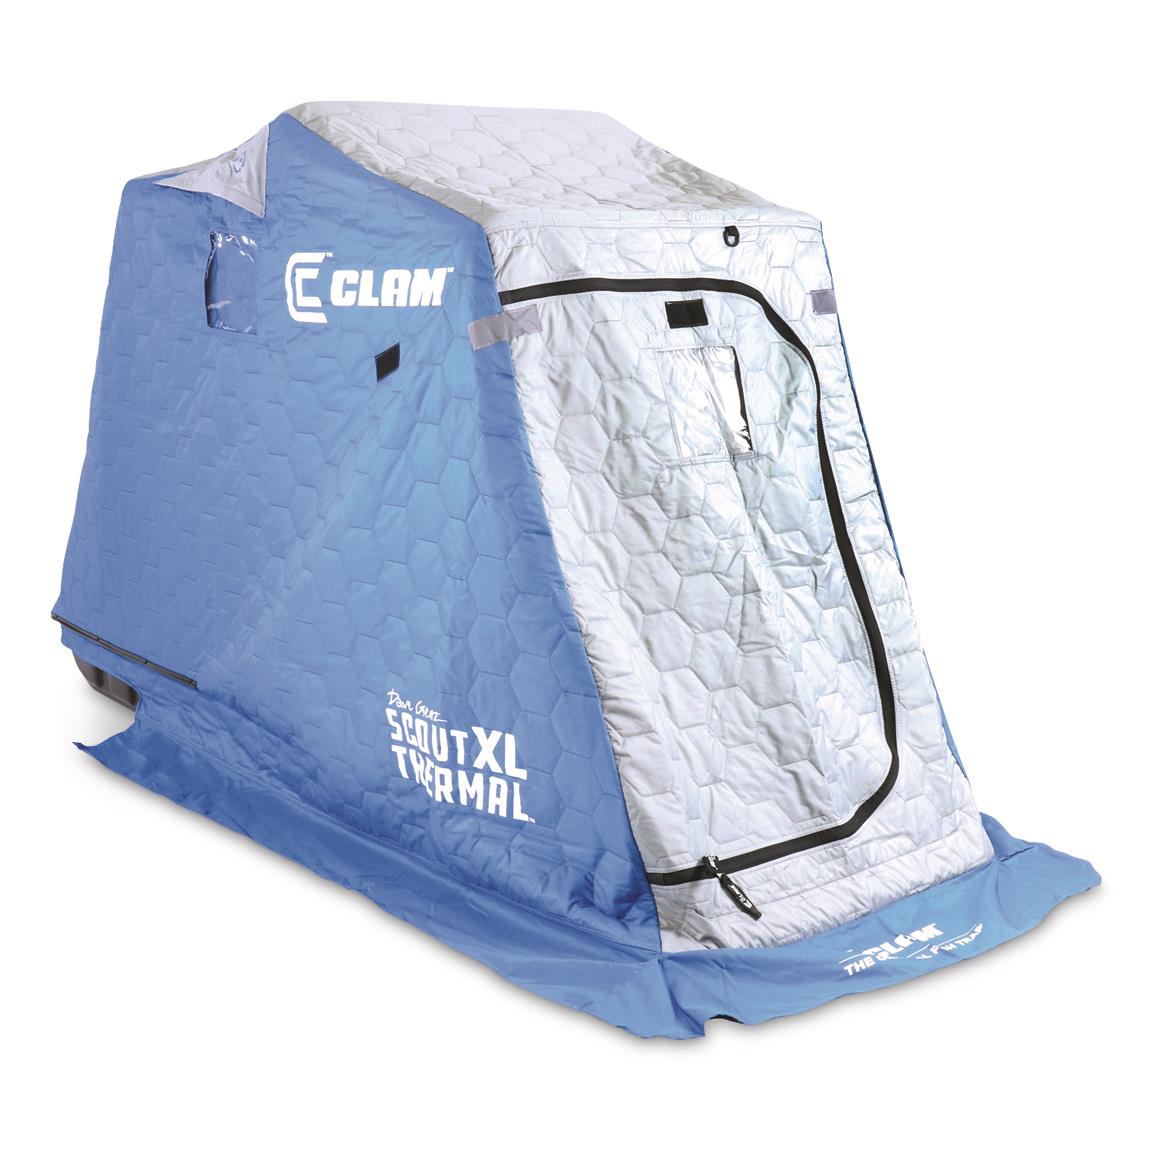 Guide gear 6 x 6 fully insulated ice fishing shelter Guide Gear Insulated Ice Fishing Shelter 6 X 6 713544 Ice Fishing Shelters At Sportsman S Guide